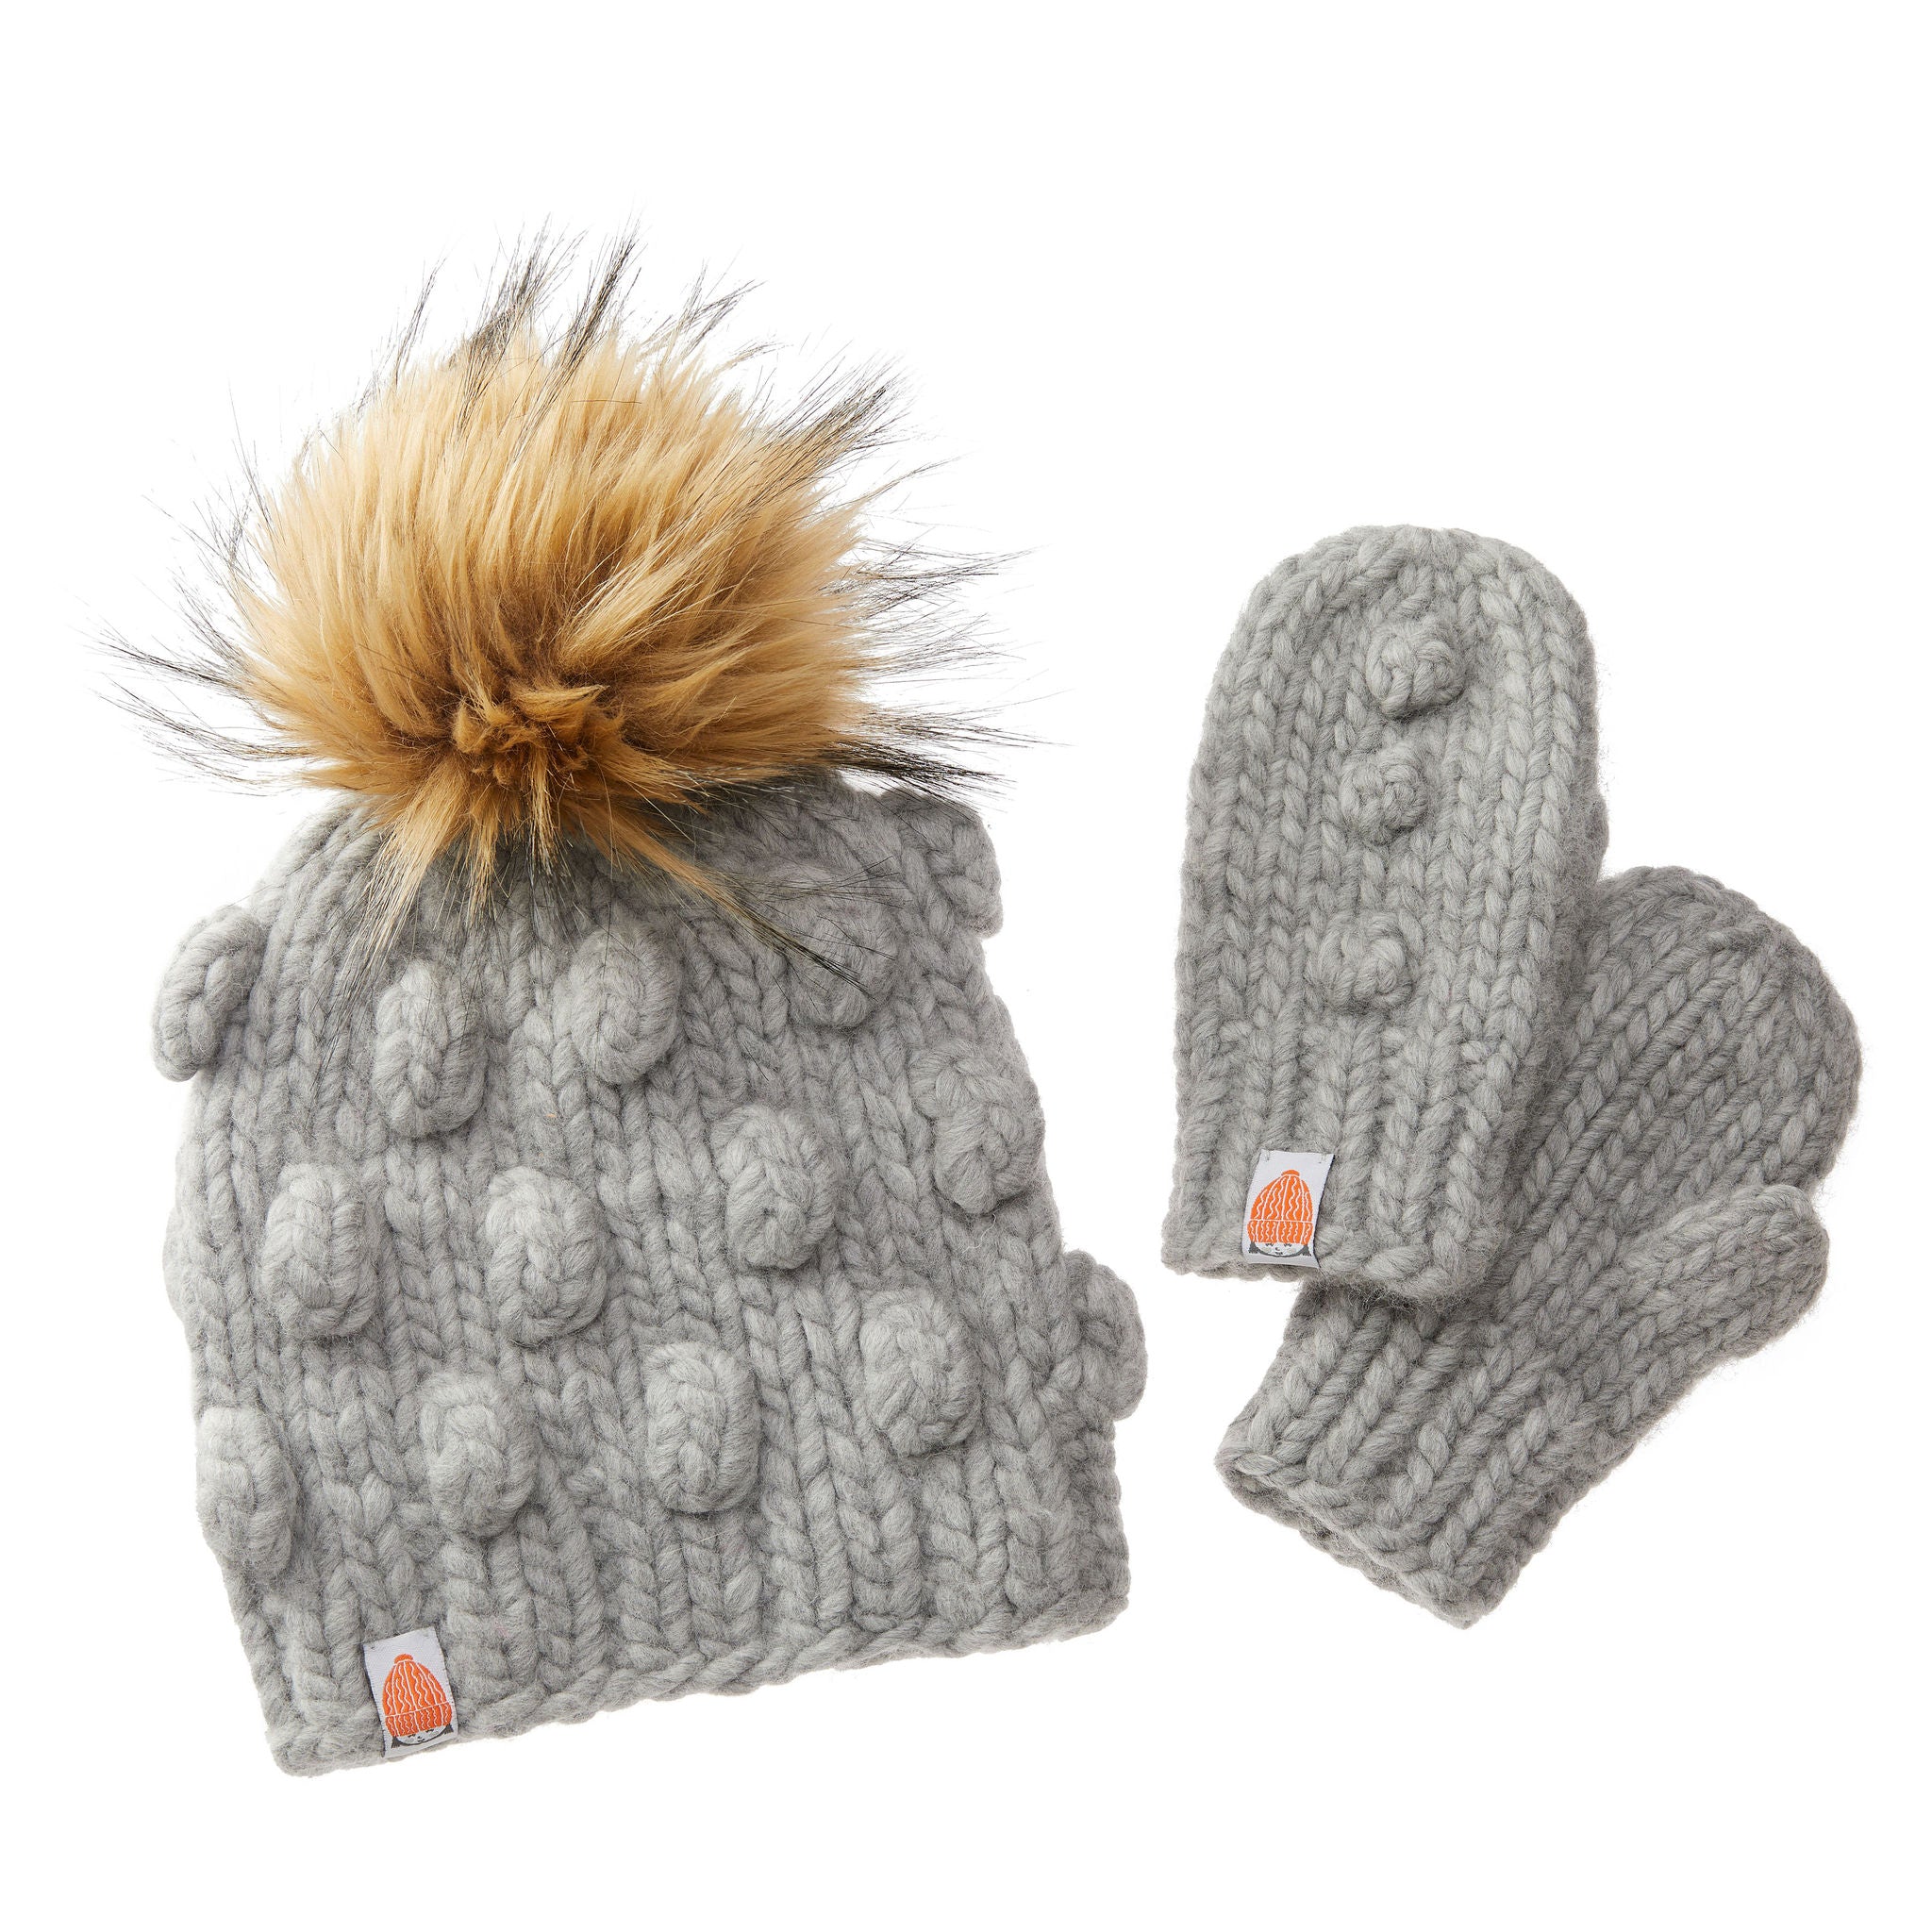 The Lil Campbell Beanie Bundle